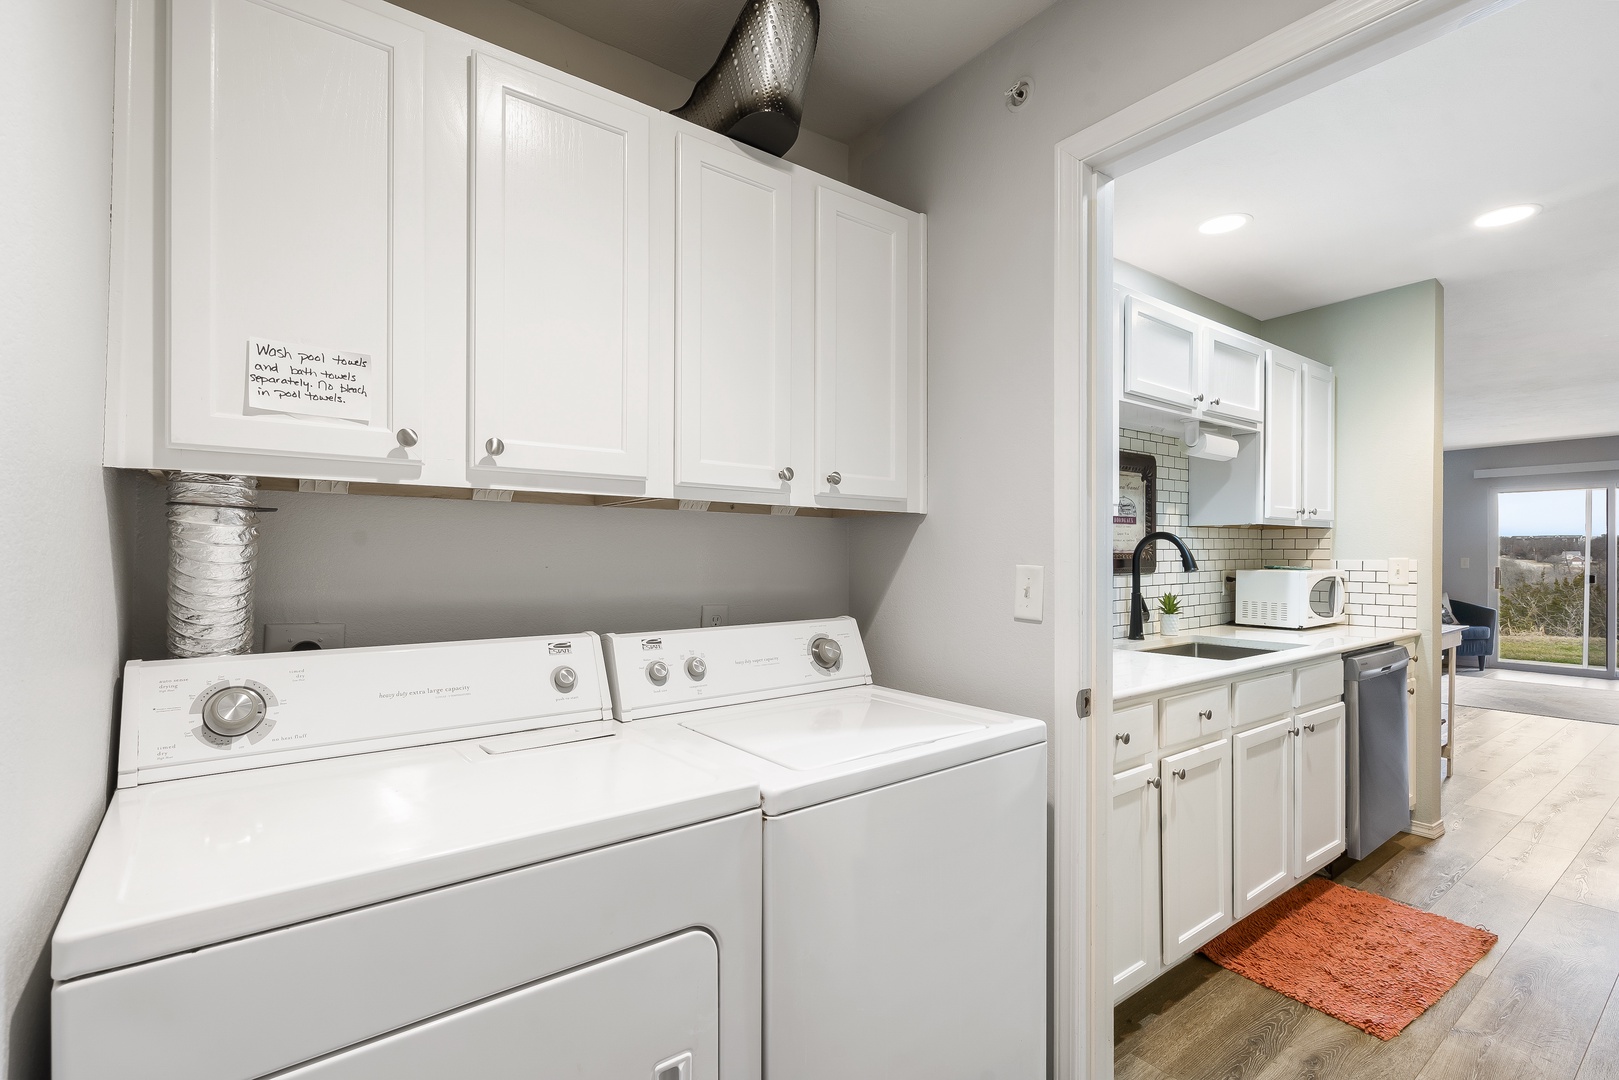 Private laundry facilities are tucked away behind the kitchen